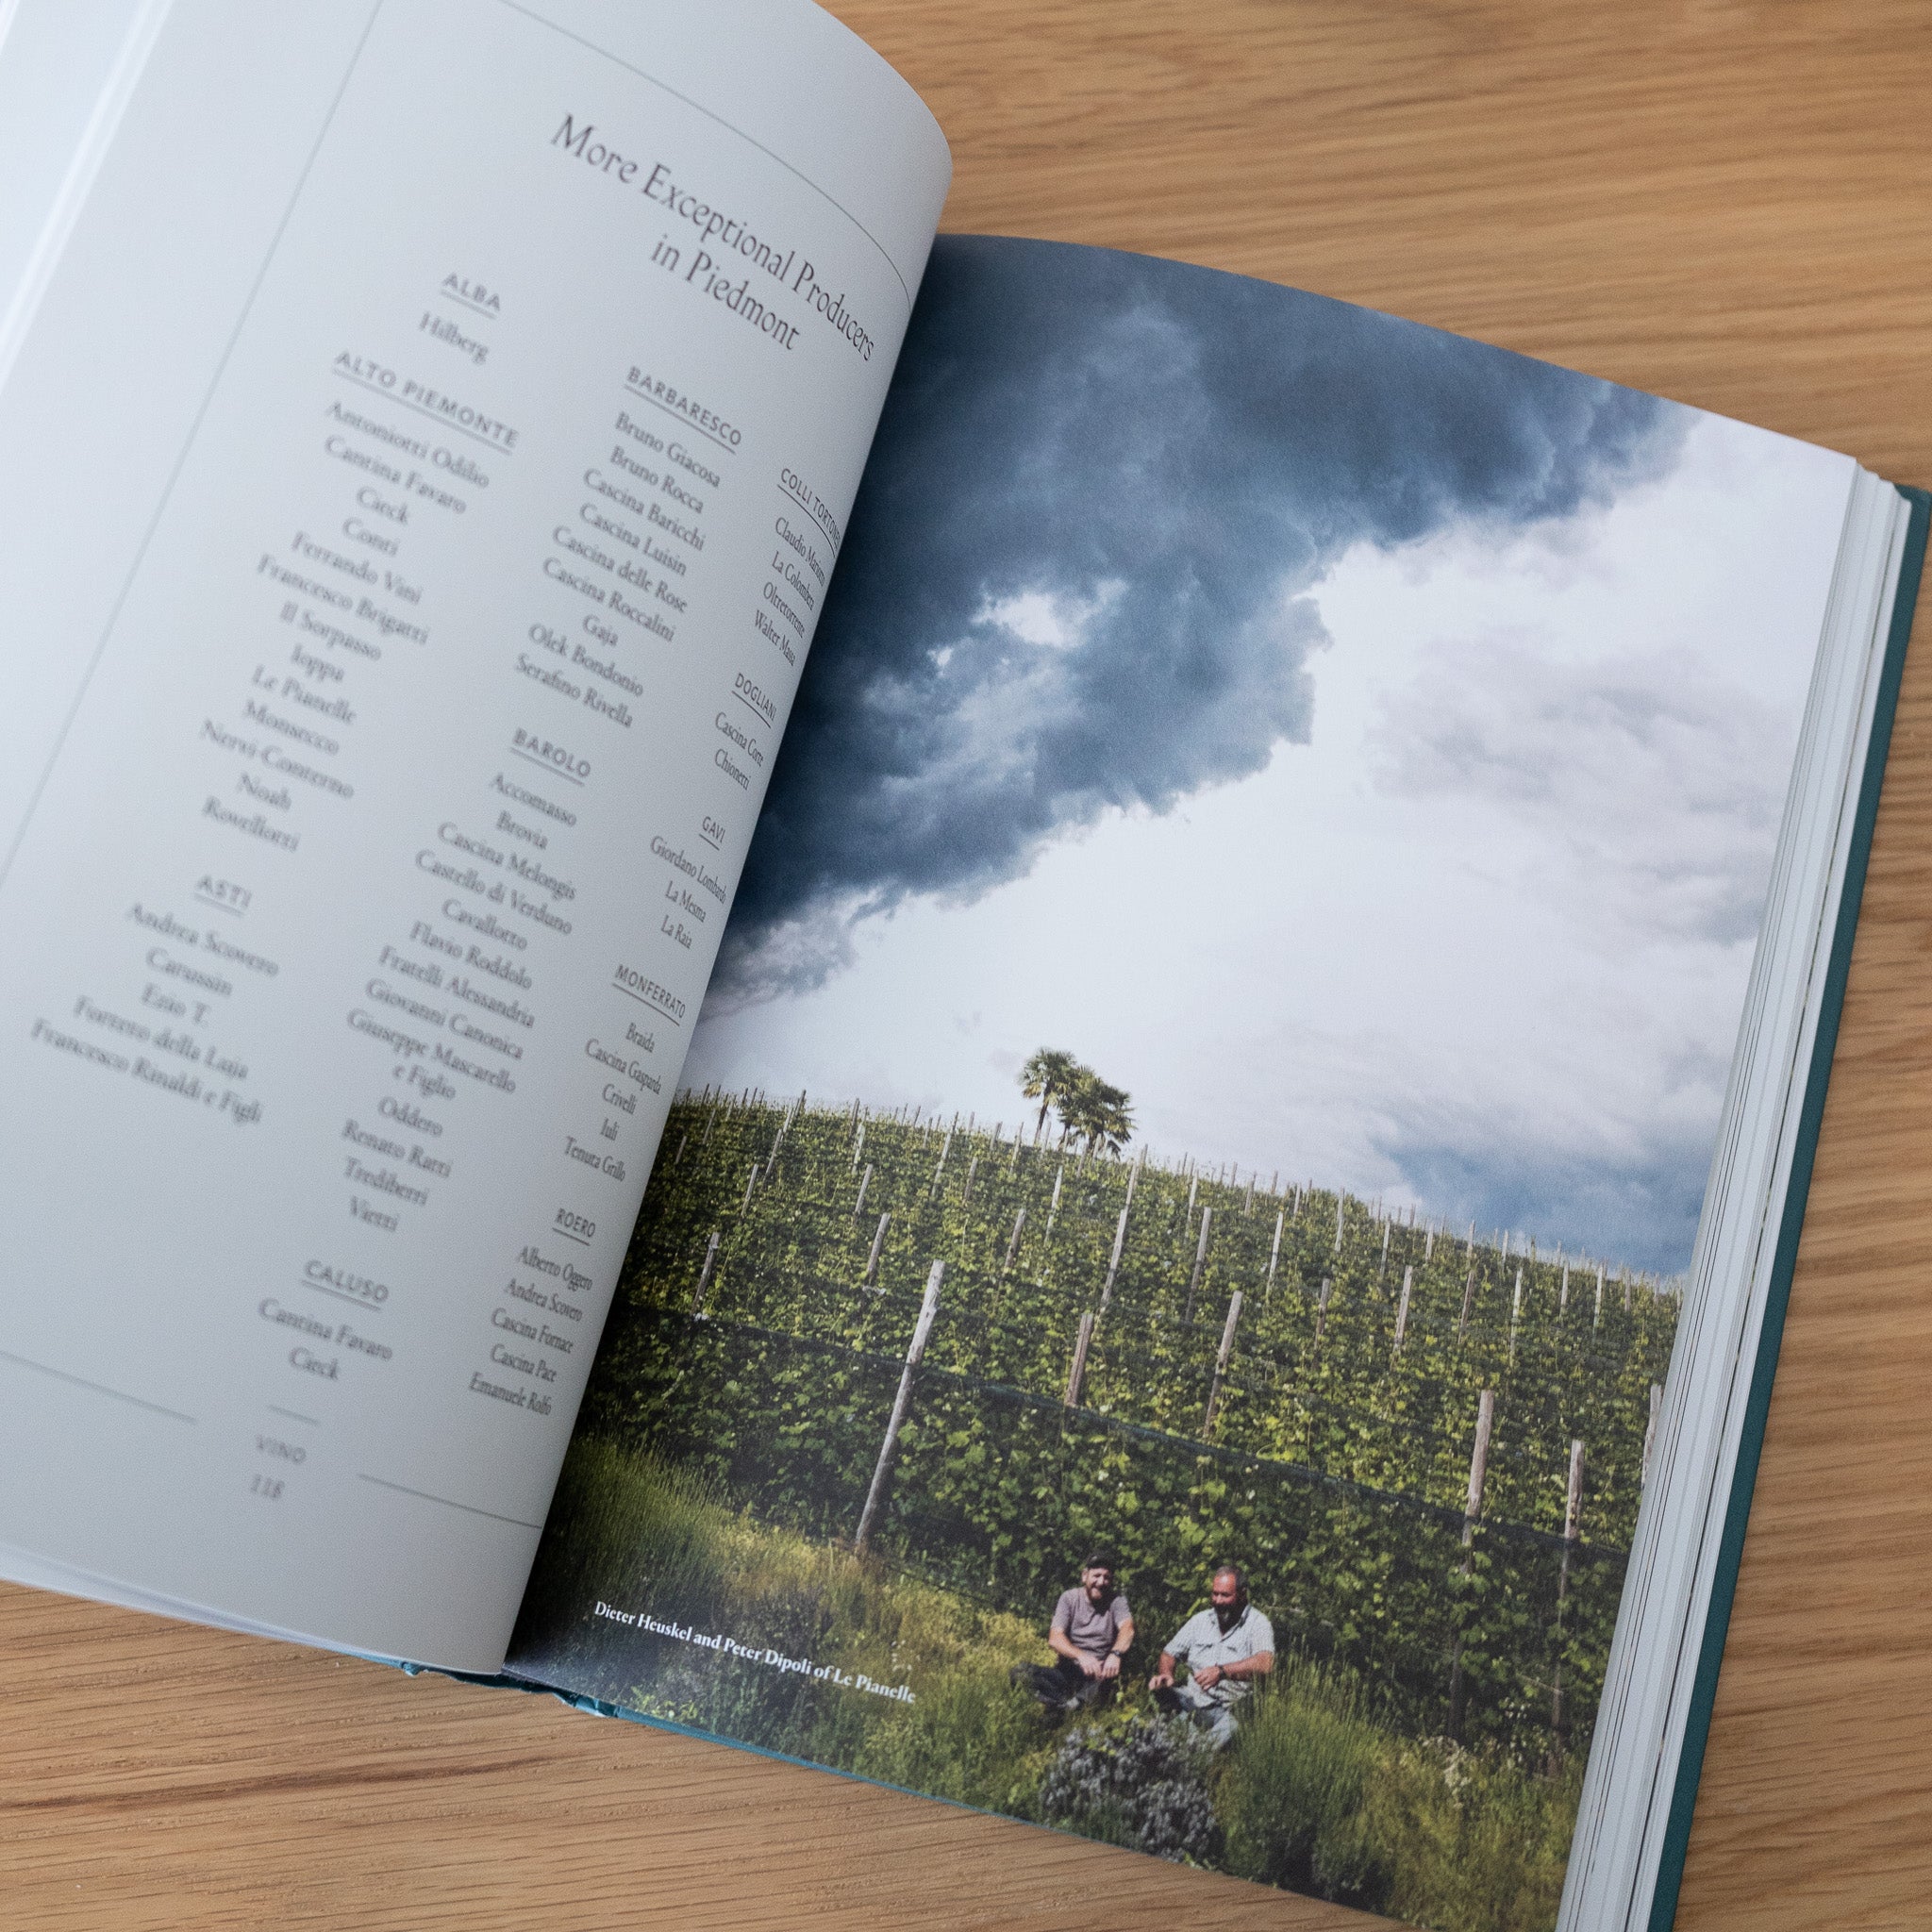 Vino The Essential Guide to Real Italian Wine